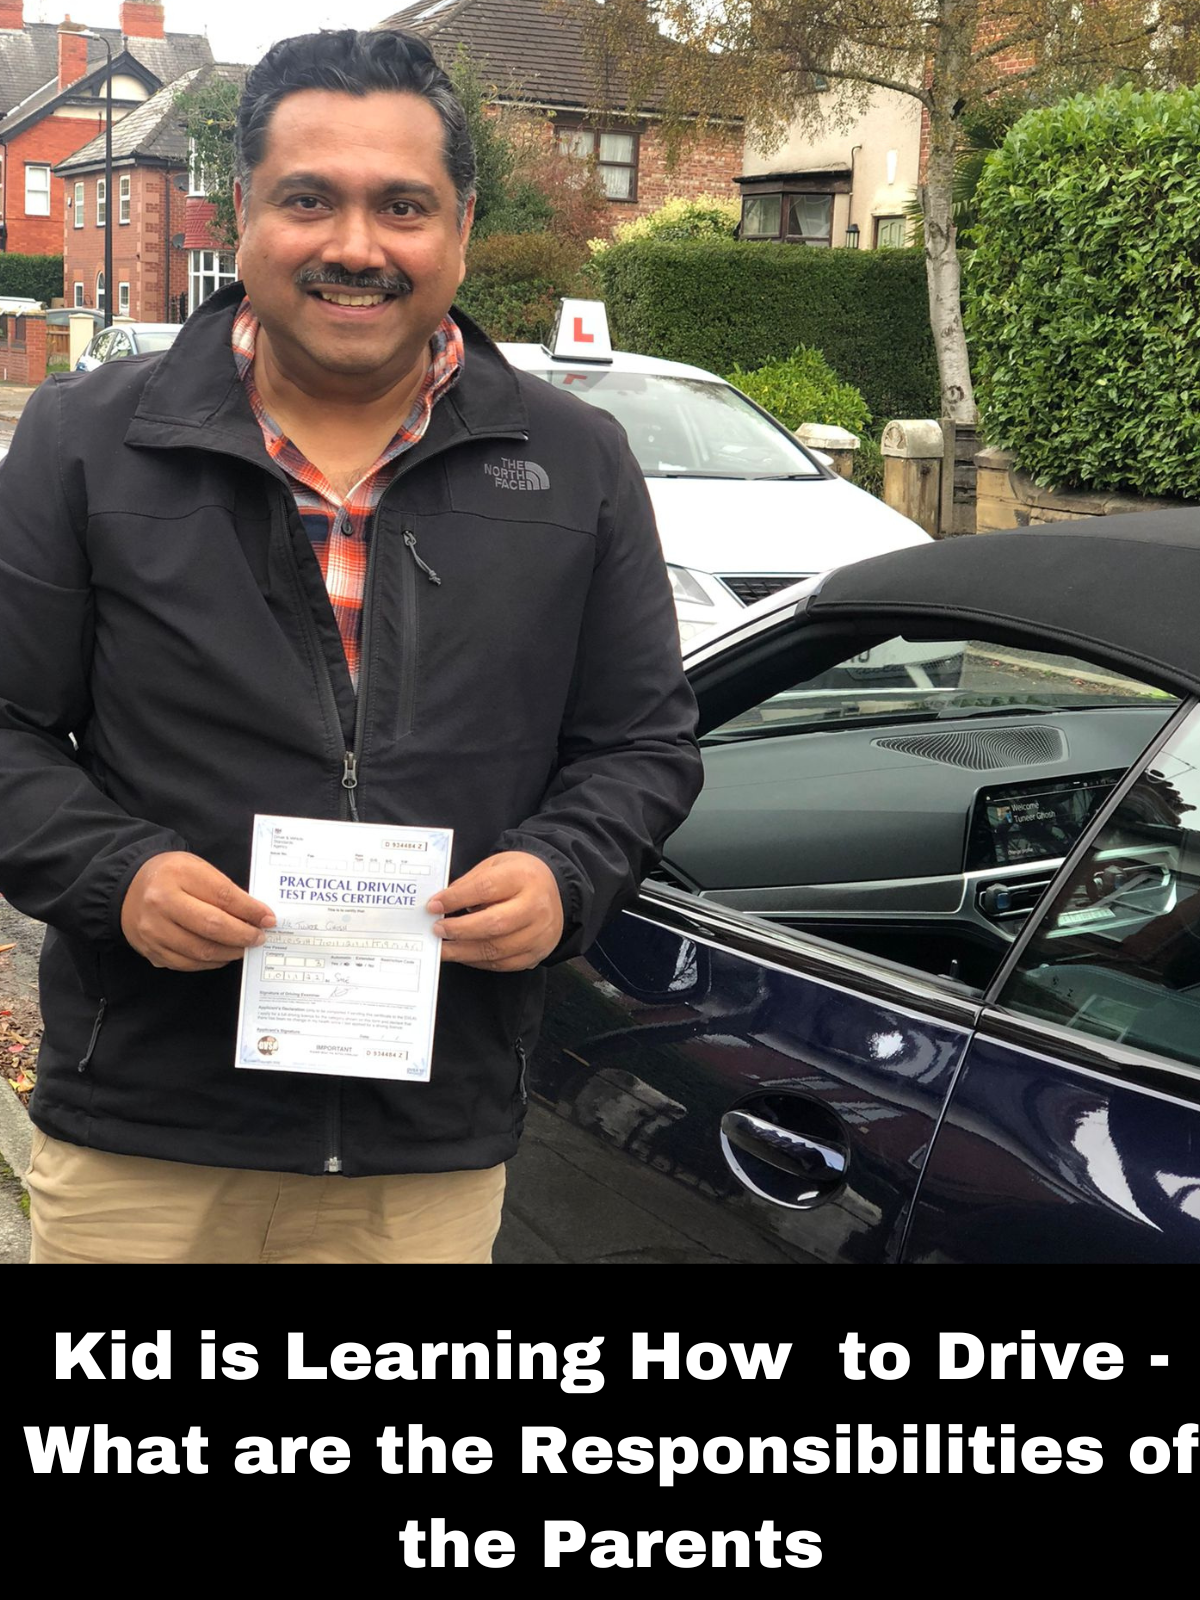 Kid is Learning How to Drive - What are the Responsibilities of the Parents